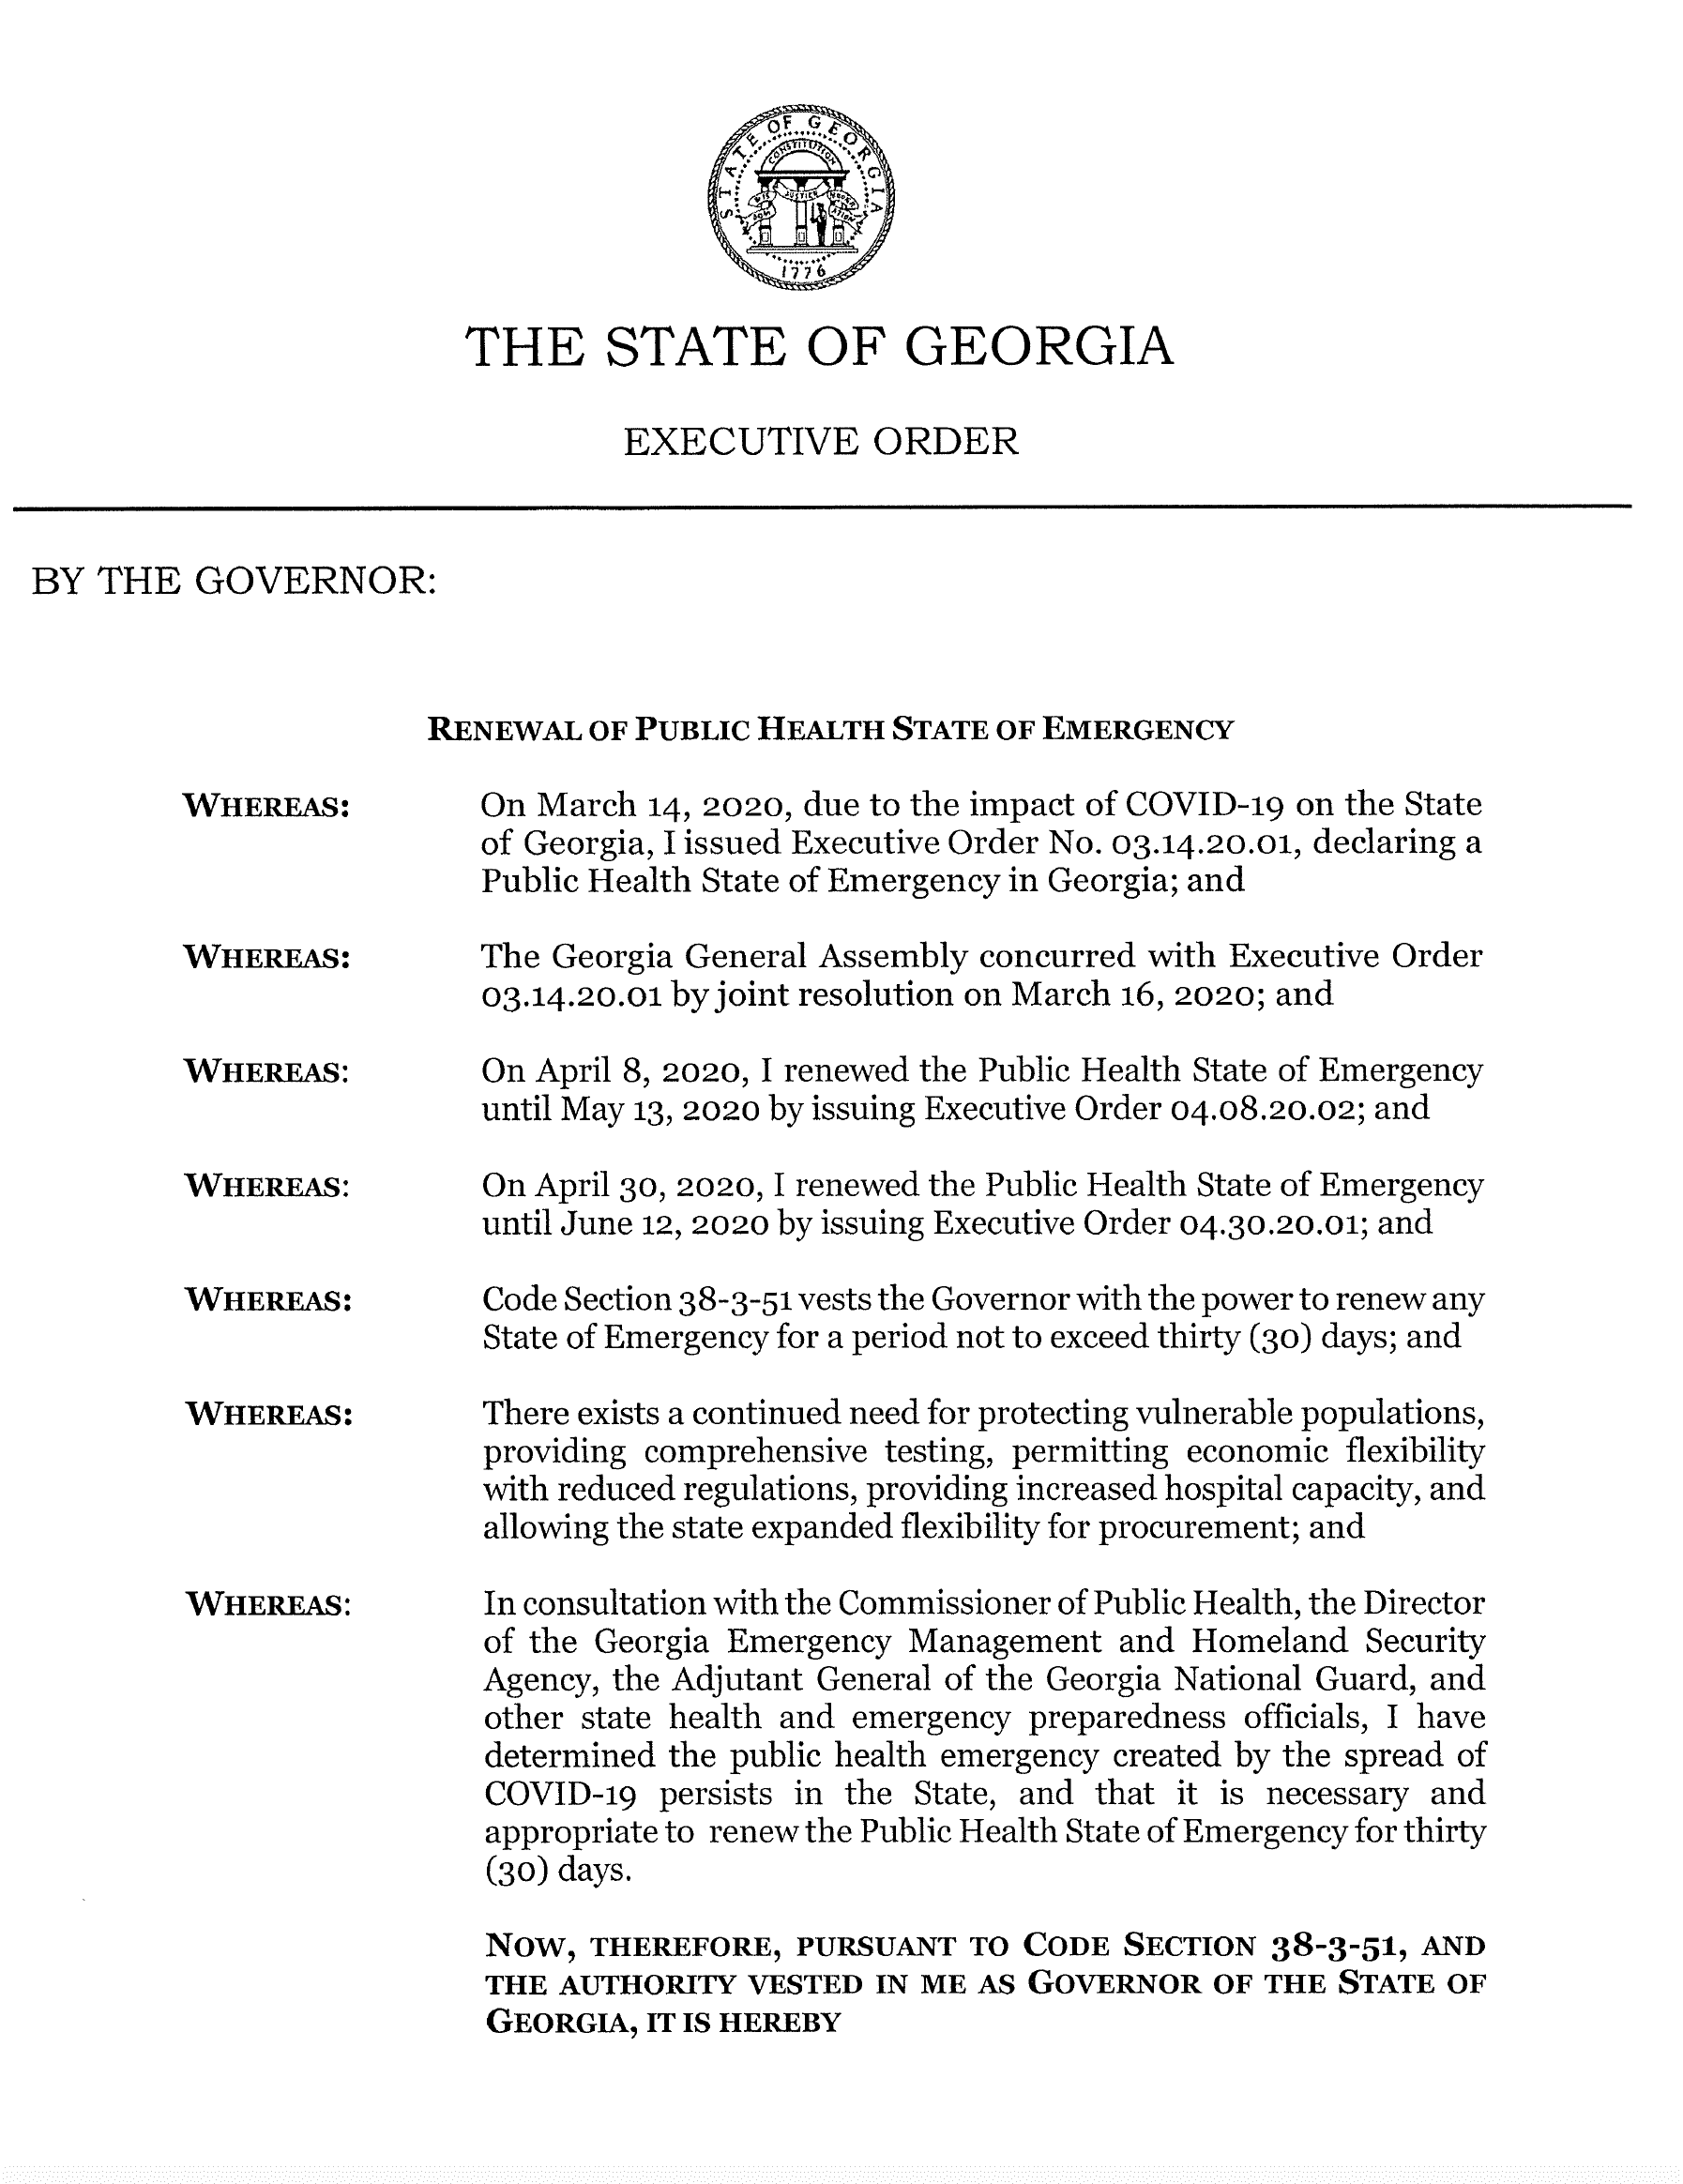 Executive Order 05.28.20 - Renewal of Public Health State of Emergency